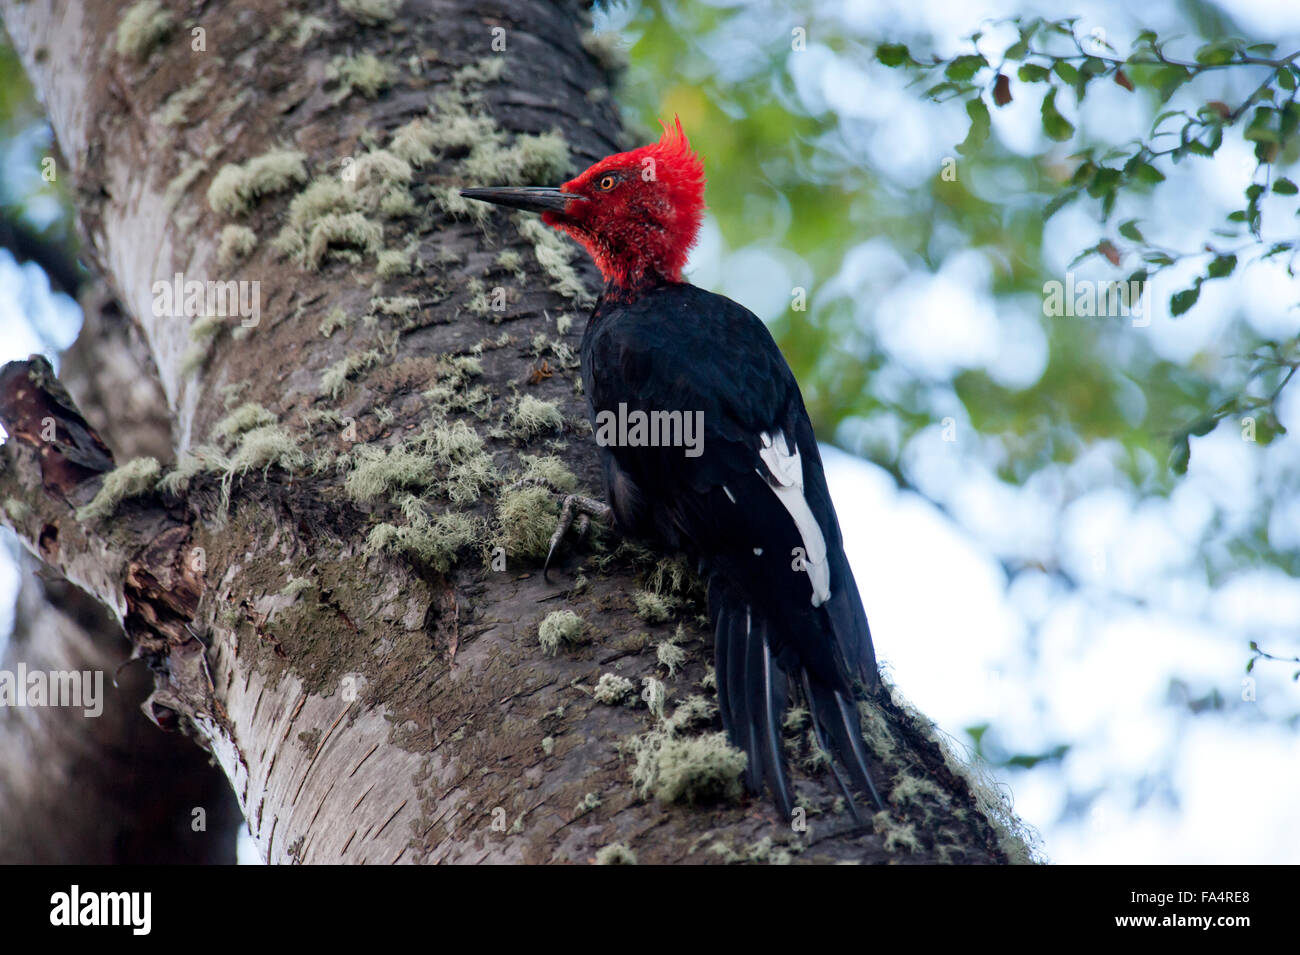 Male Magellanic woodpecker (Campephilus magellanicus), on tree showing red head & crest, Argentina, South America Stock Photo